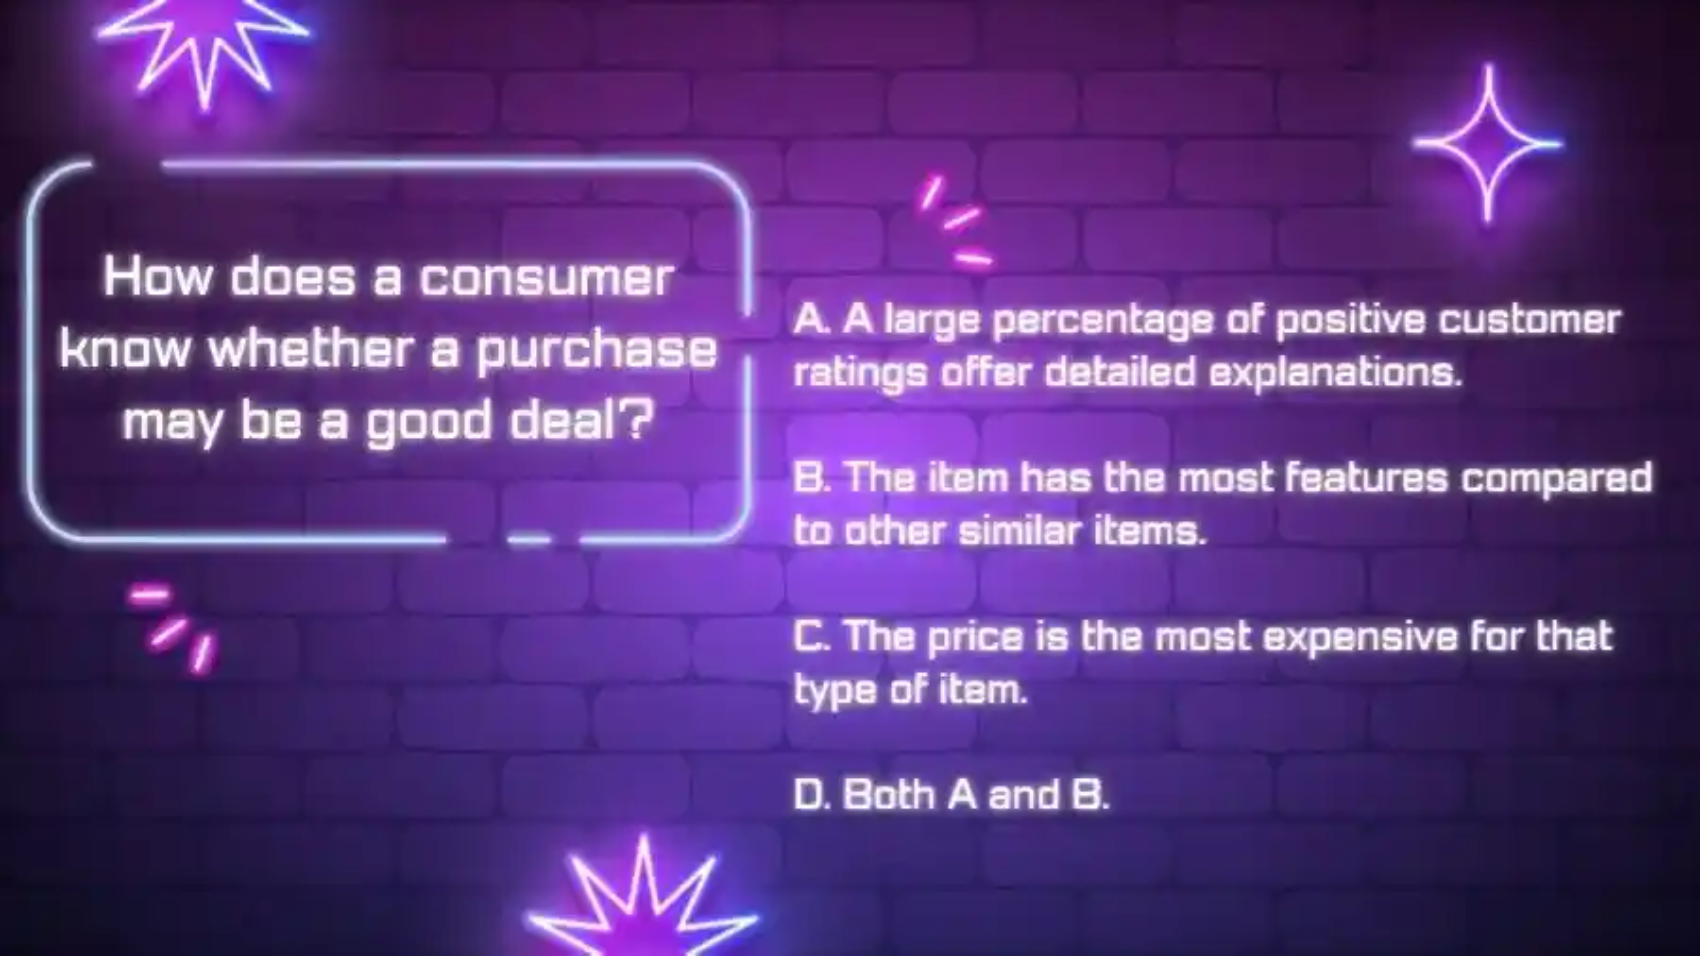 How does a consumer know whether a purchase may be a good deal?